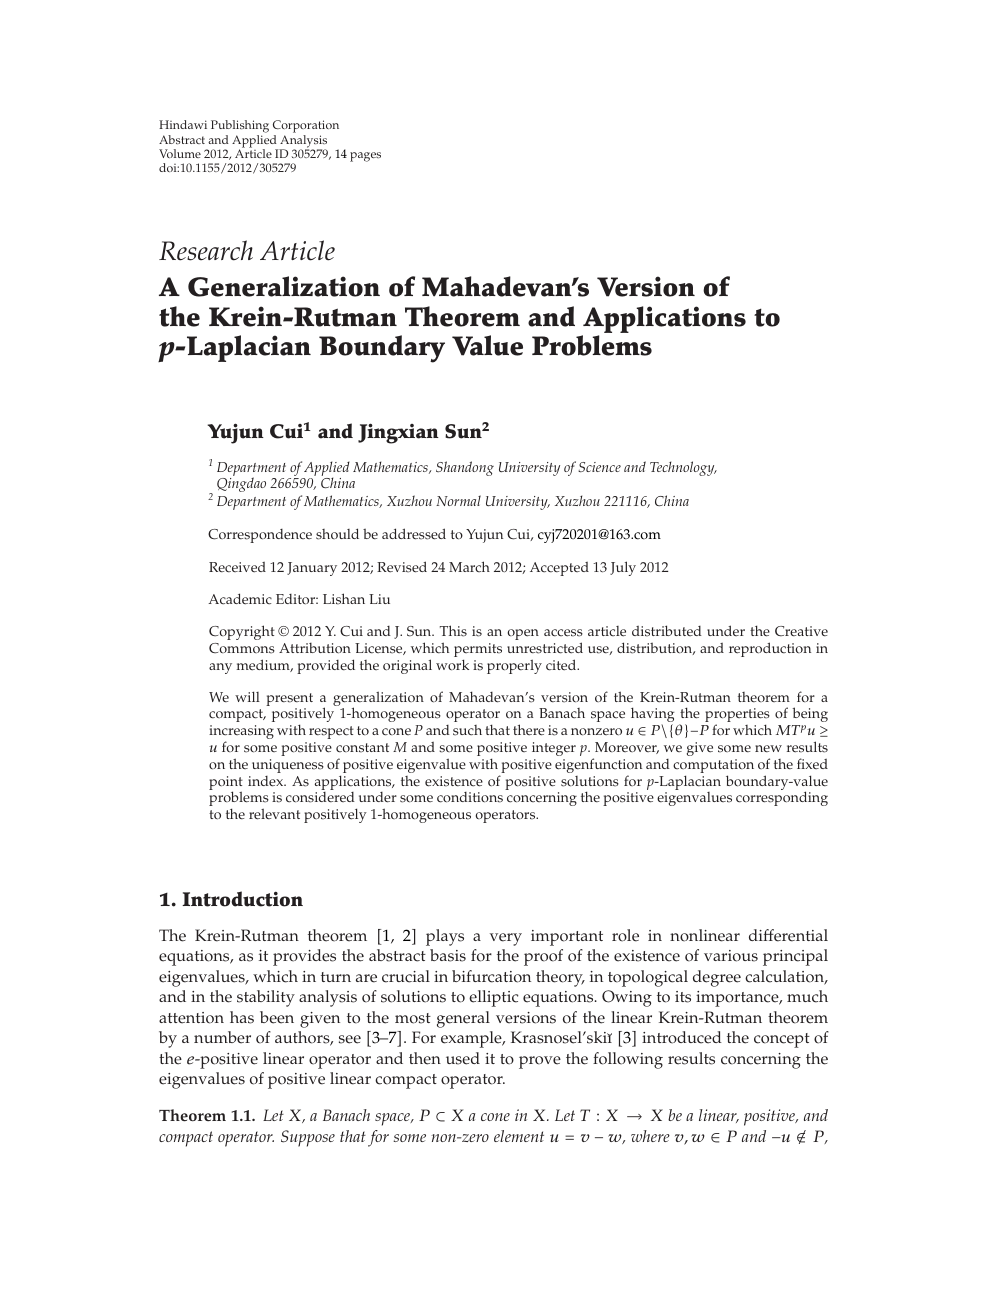 A Generalization Of Mahadevan S Version Of The Krein Rutman Theorem And Applications To P Laplacian Boundary Value Problems Topic Of Research Paper In Mathematics Download Scholarly Article Pdf And Read For Free